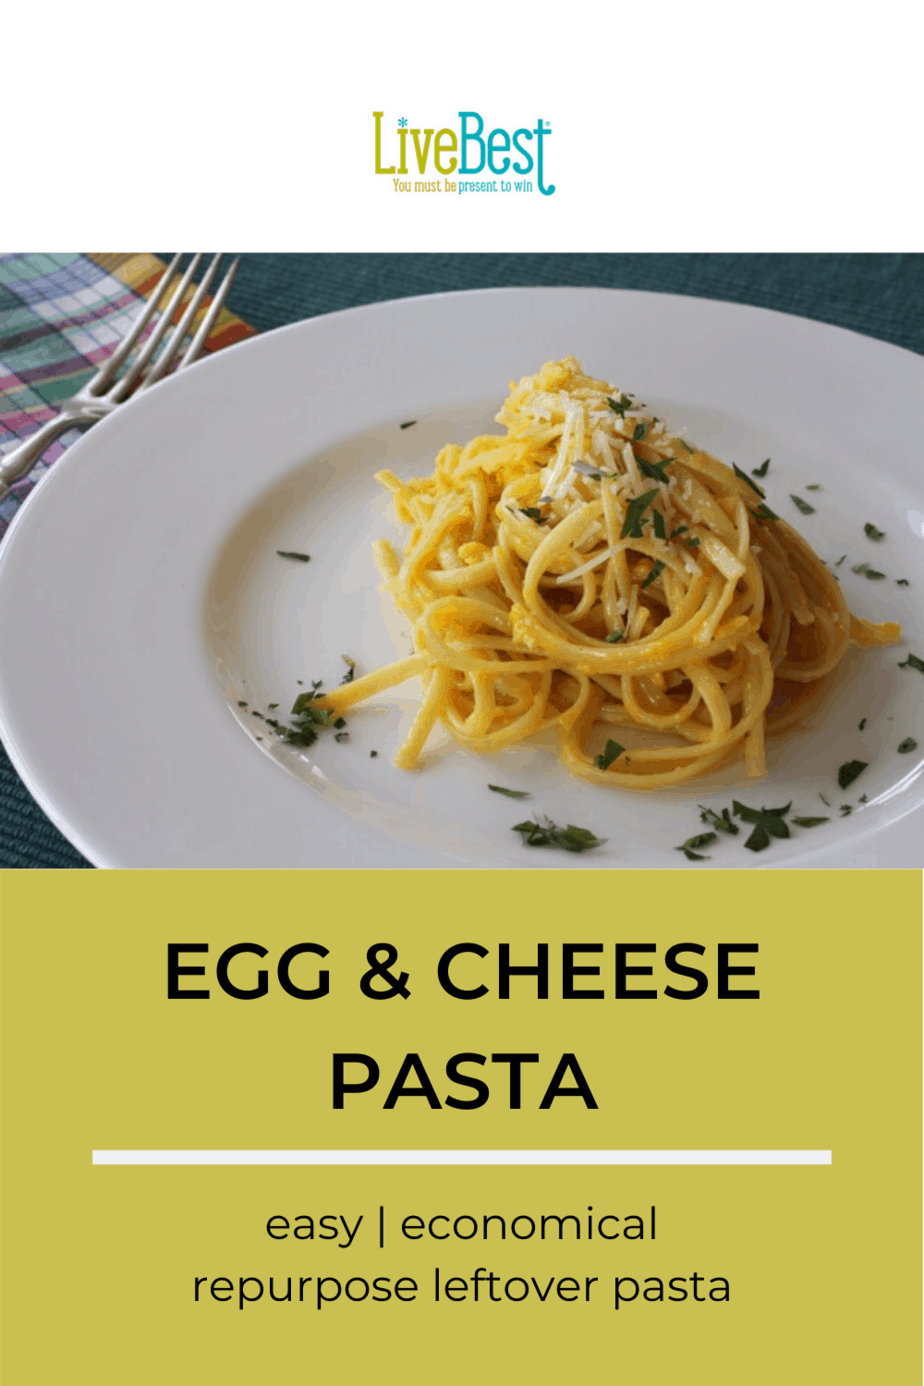 Egg and cheese pasta on plate